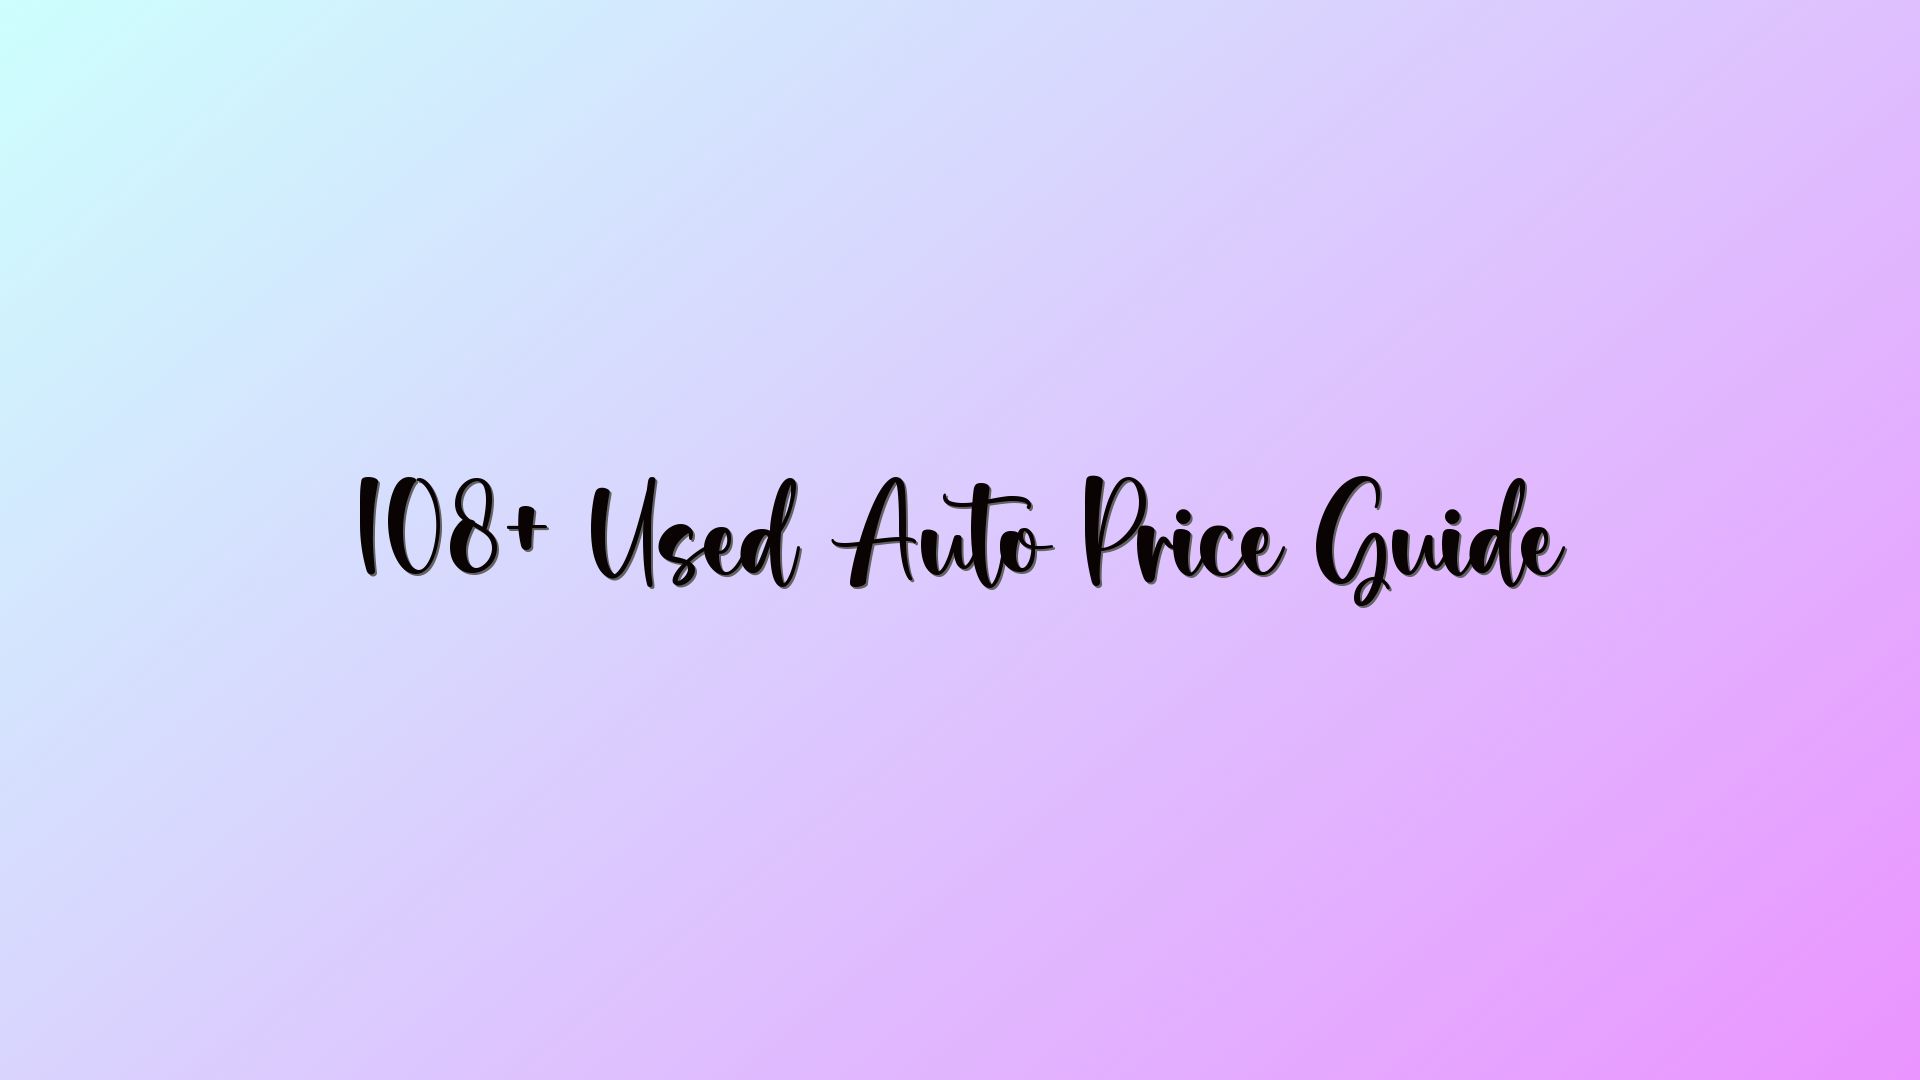 108+ Used Auto Price Guide